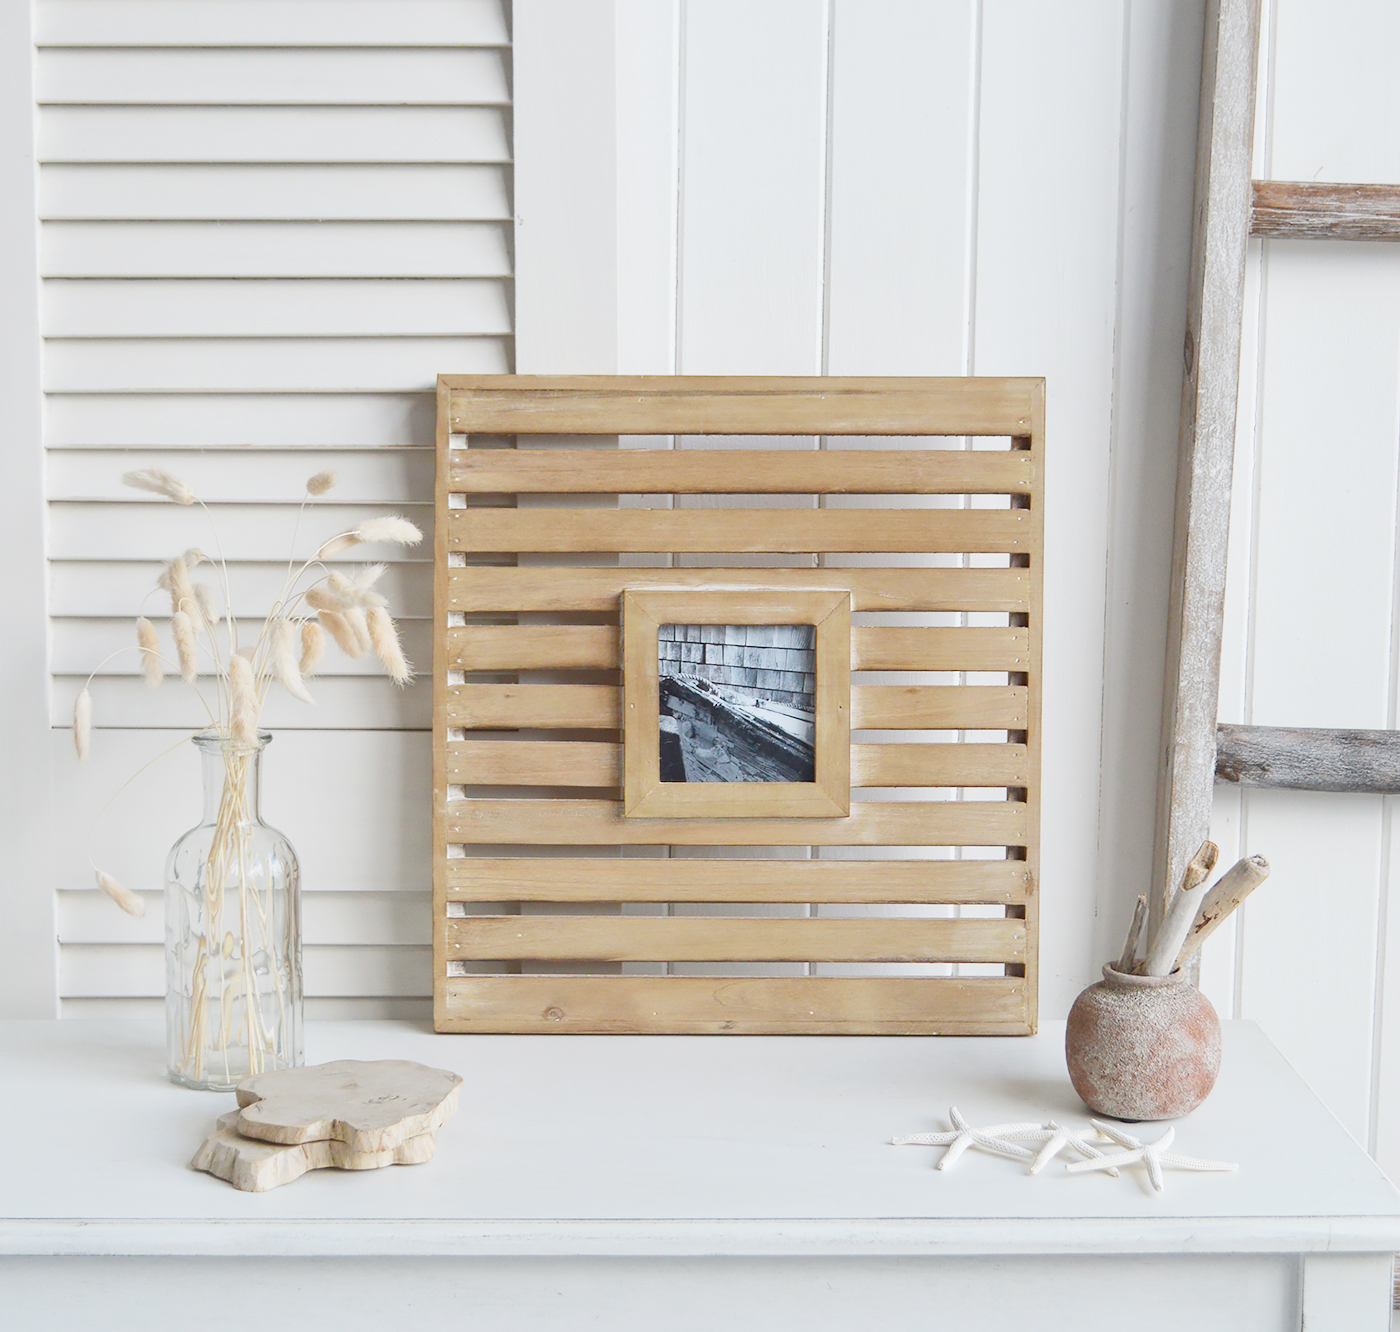 Weston Photo Frames - New England Coastal, Farmhouse, City and Country Furniture Homes and Interiors - Shiplap 4 x 4 oversized